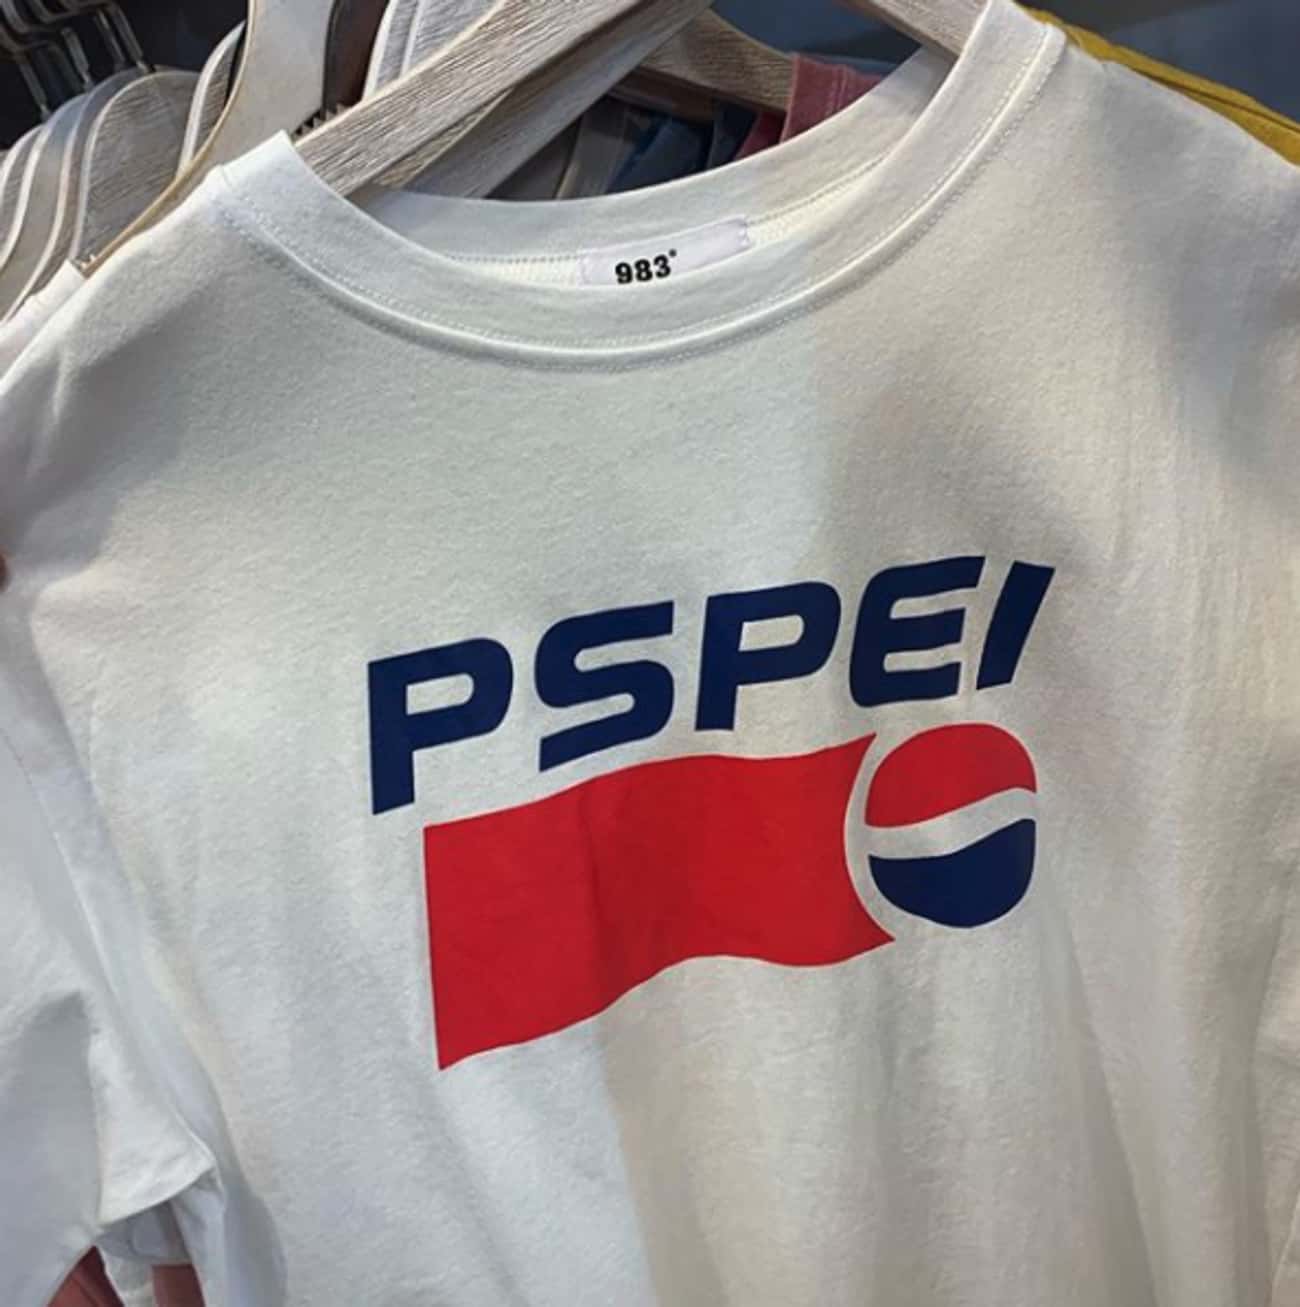 28 Amazing Thrift Store T-Shirts That Got Lost In Translation